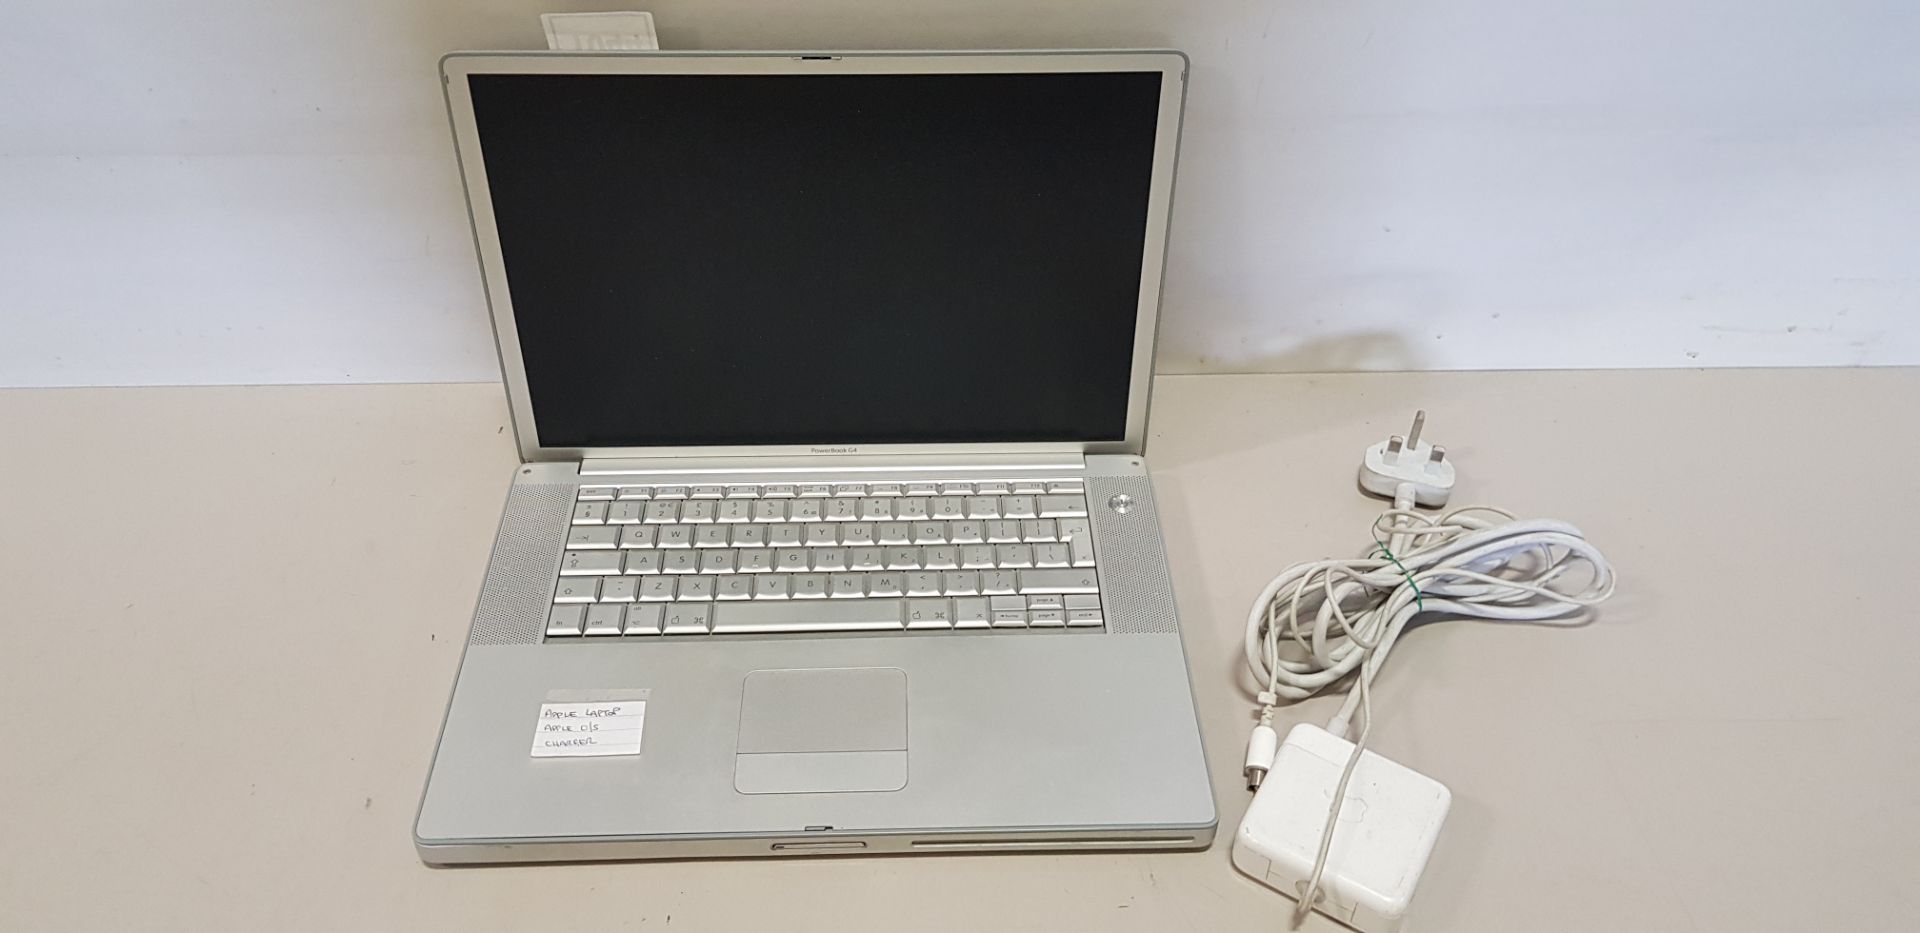 APPLE LAPTOP POWERBOOK G4 WITH APPLE O/S COMES WITH CHARGER